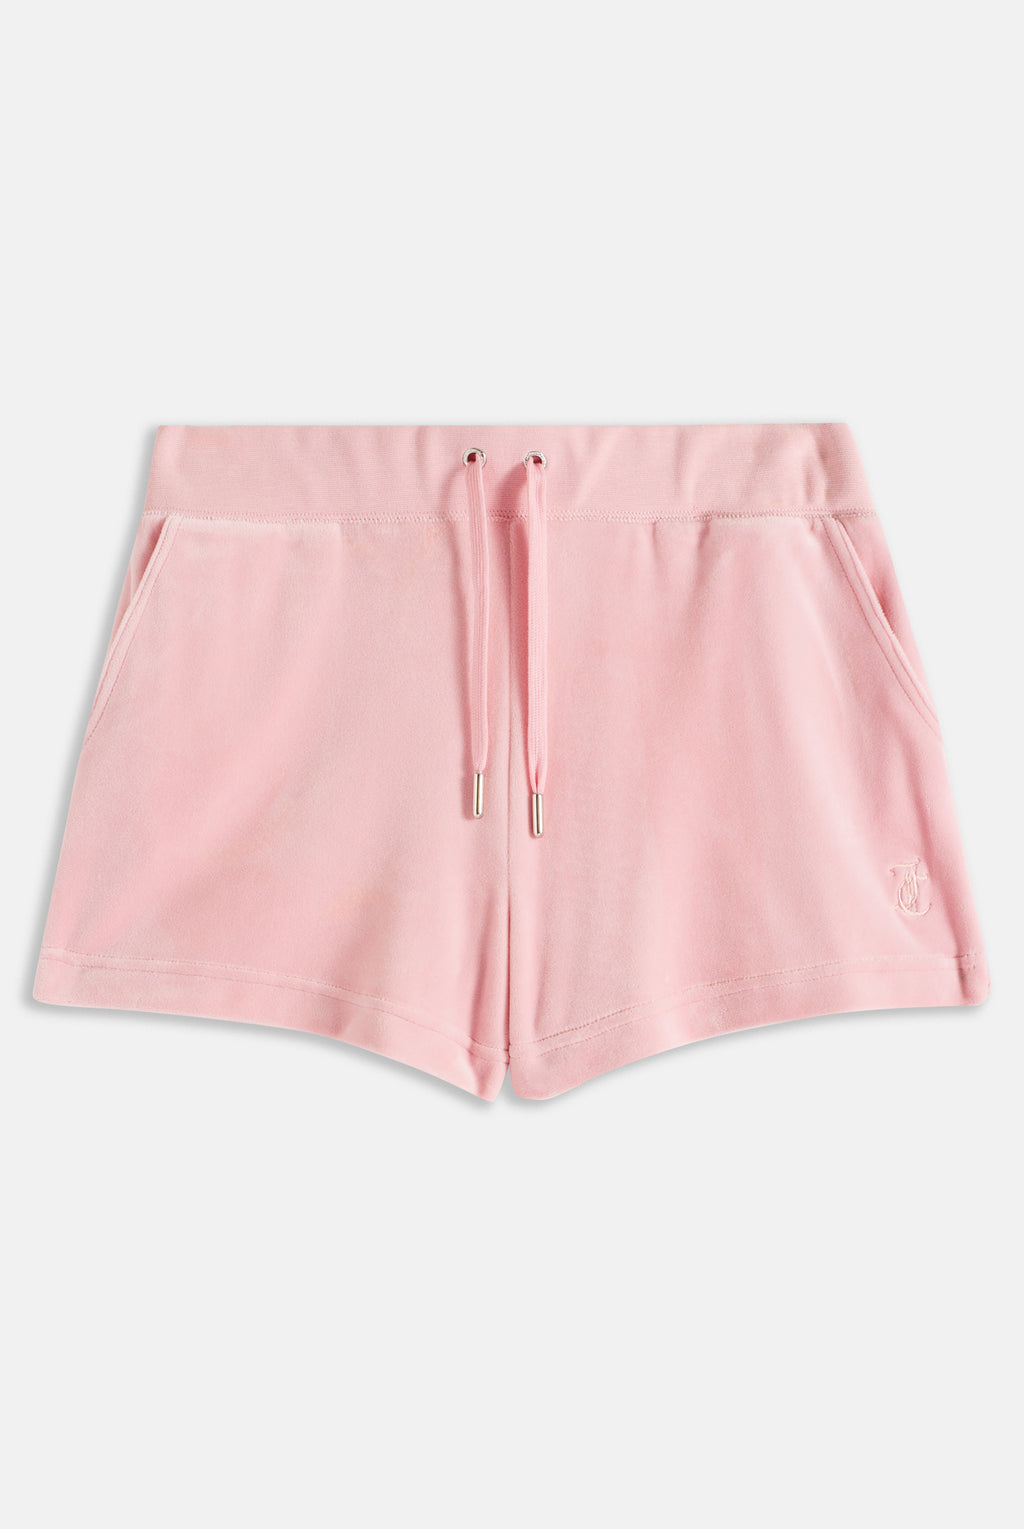 CANDY PINK CLASSIC VELOUR TRACK SHORT